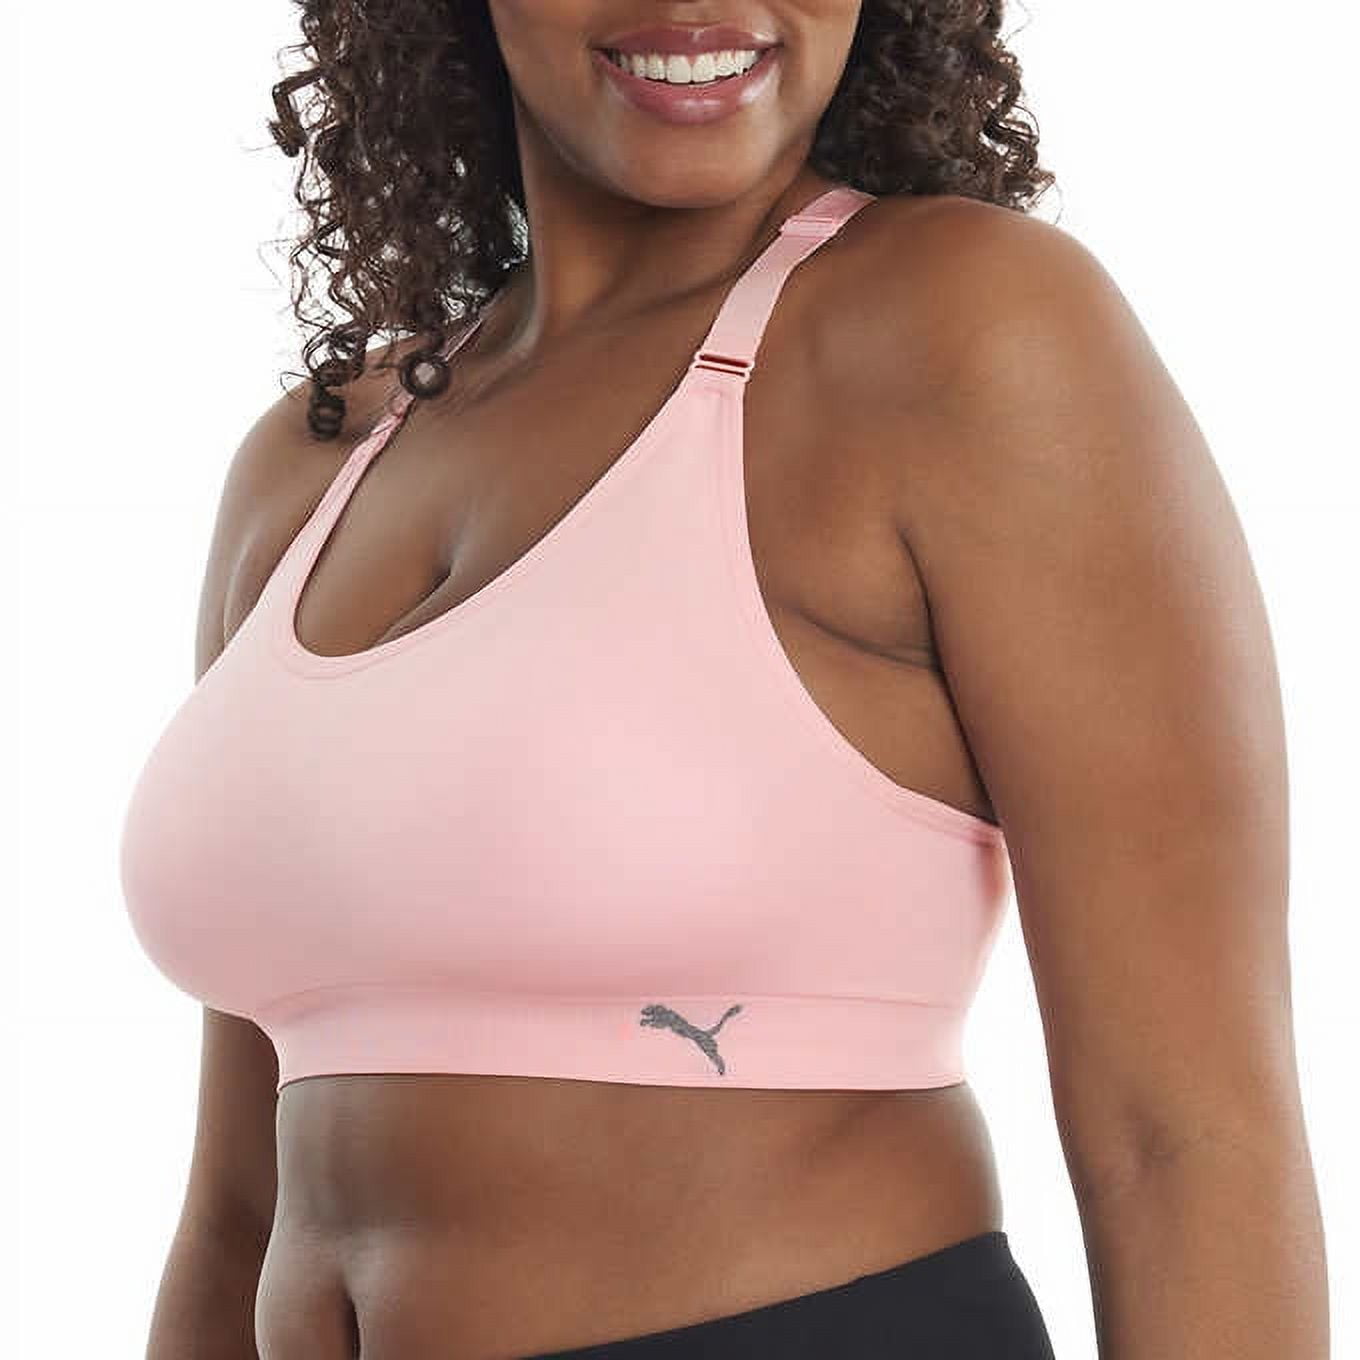 Puma Womens Sports Bra Pink With Removable Pads Size M (Dirty